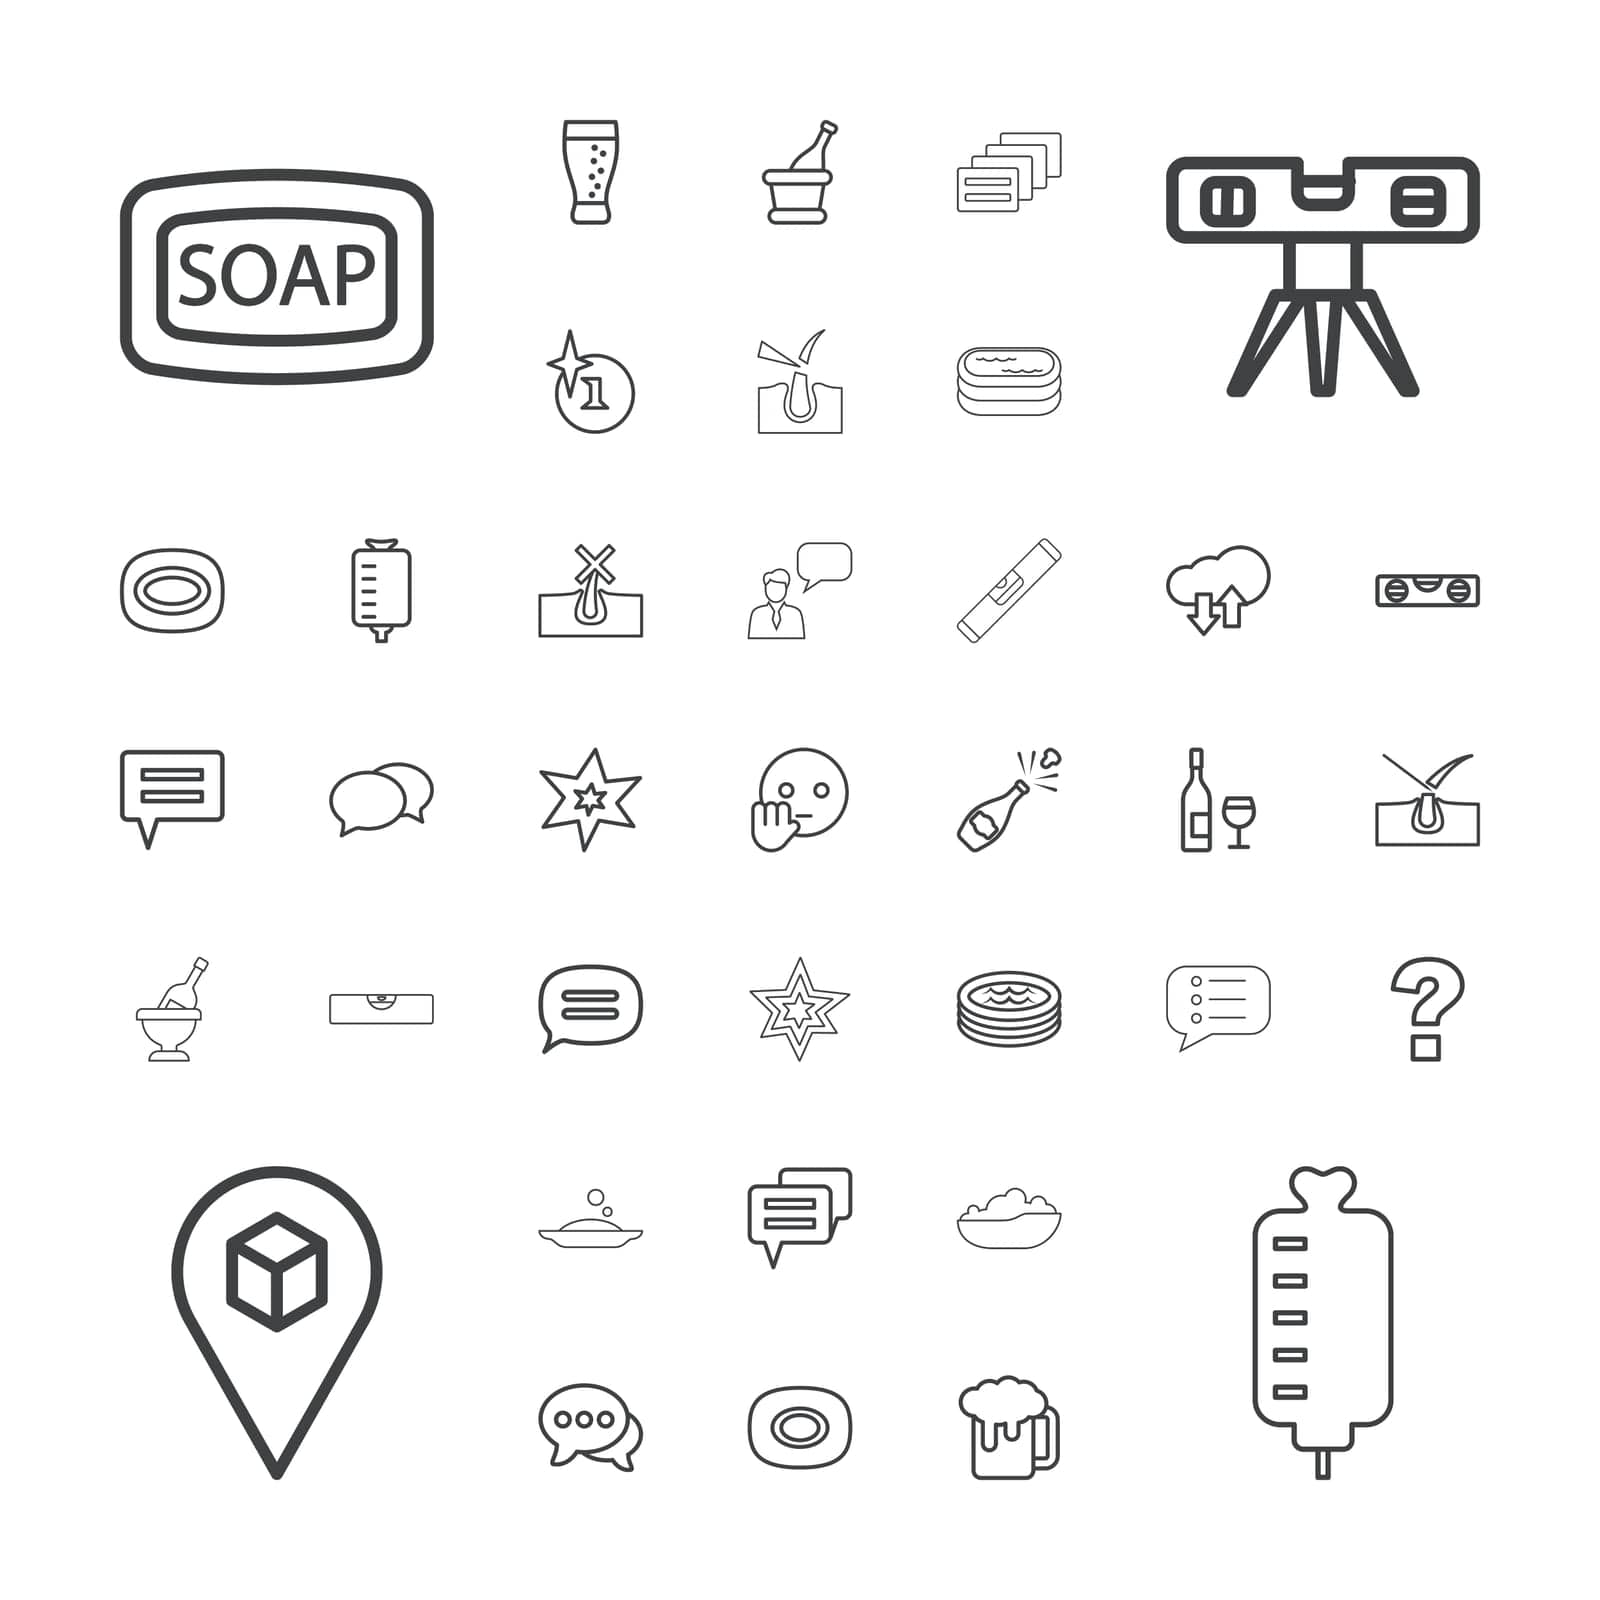 drop,no,upload,icon,skin,for,bottle,ruler,cloud,hair,download,bubble,web,and,champagne,vector,man,shave,glass,emot,set,question,jacuzzi,level,in,mobile,counter,message,soda,bubblle,bye,explosion,with,chat,baby,wine,soap